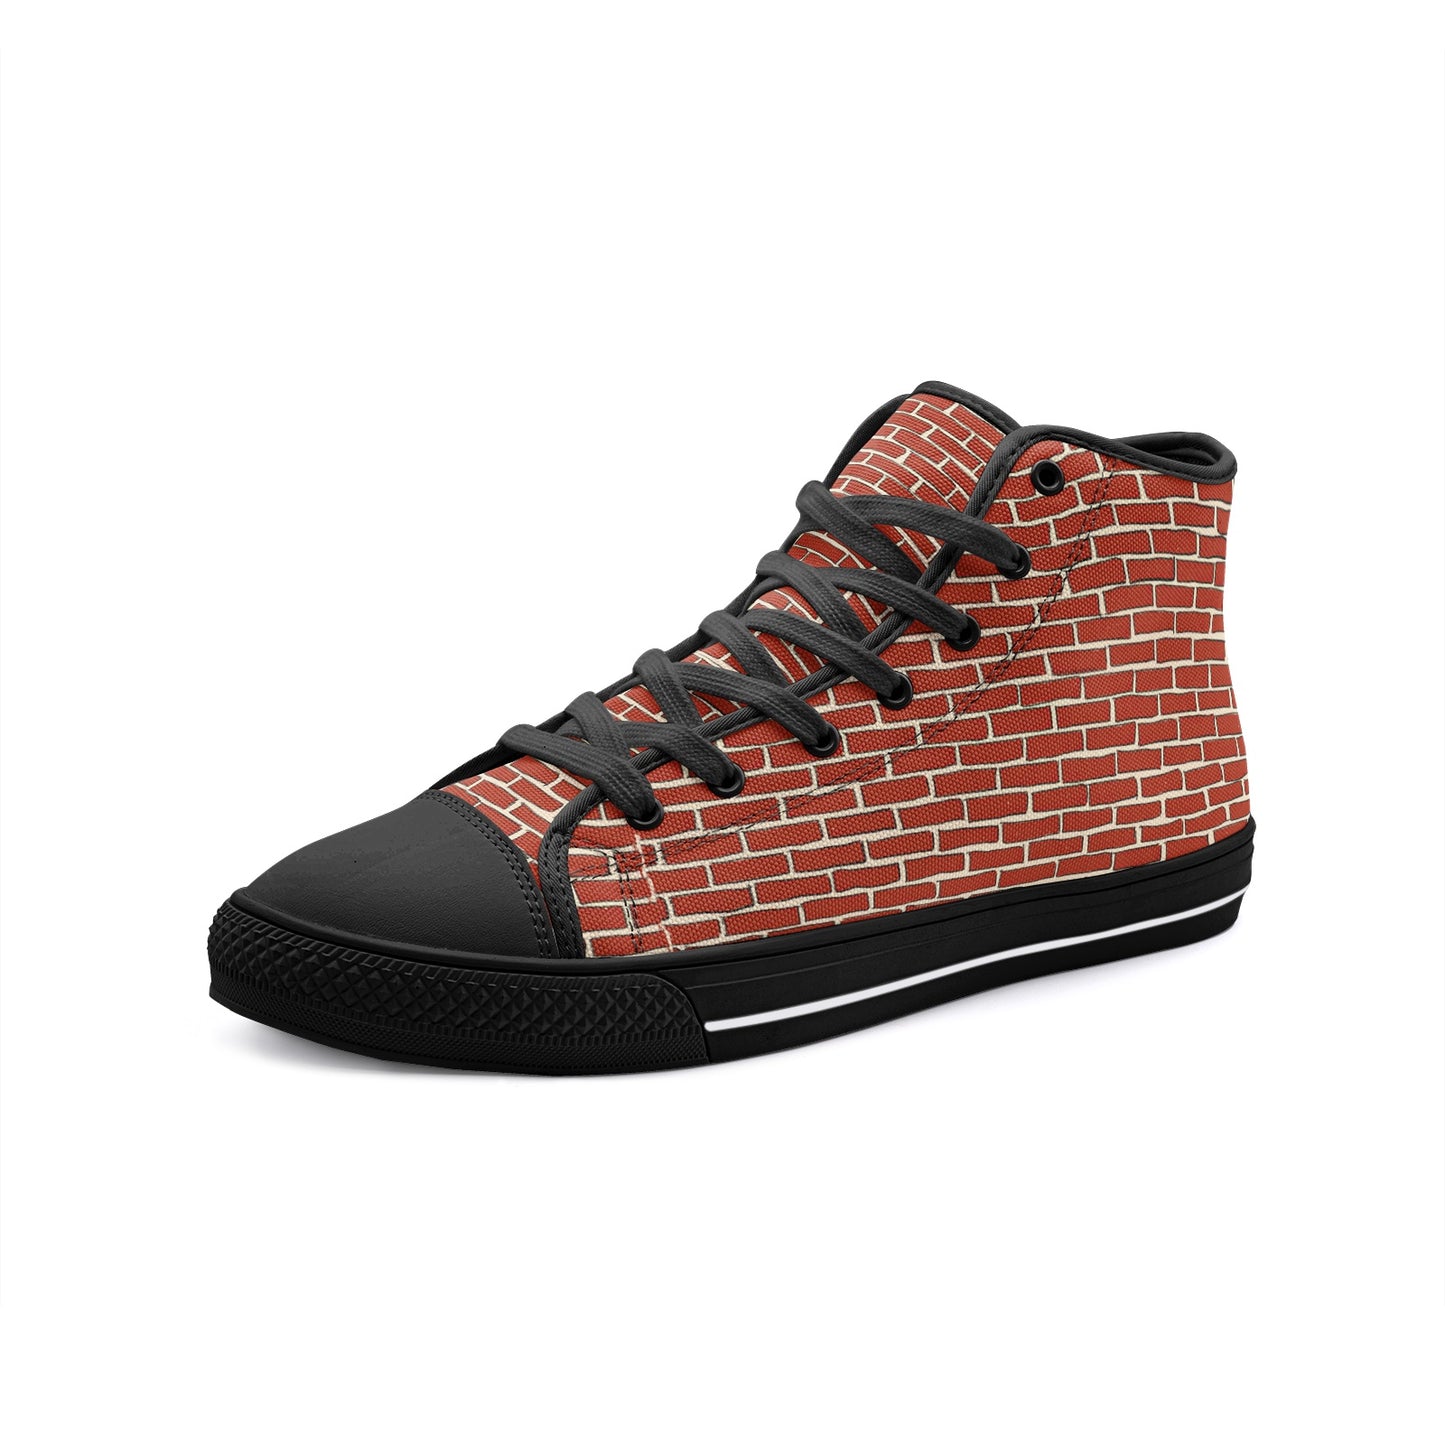 RED BRICKS - Unisex High Top Canvas Shoes